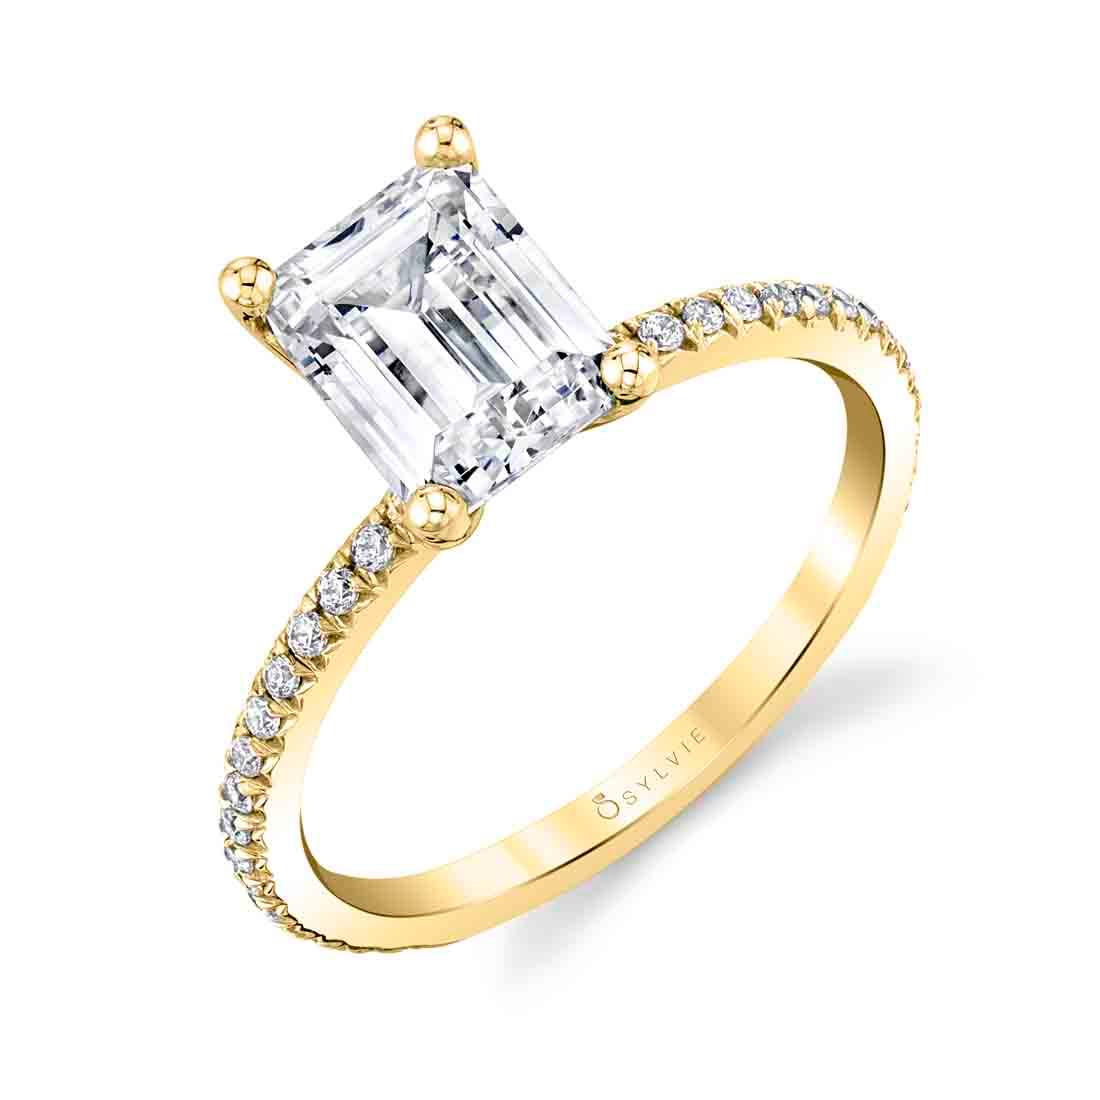   Yellow Gold Emerald Cut Engagement Ring